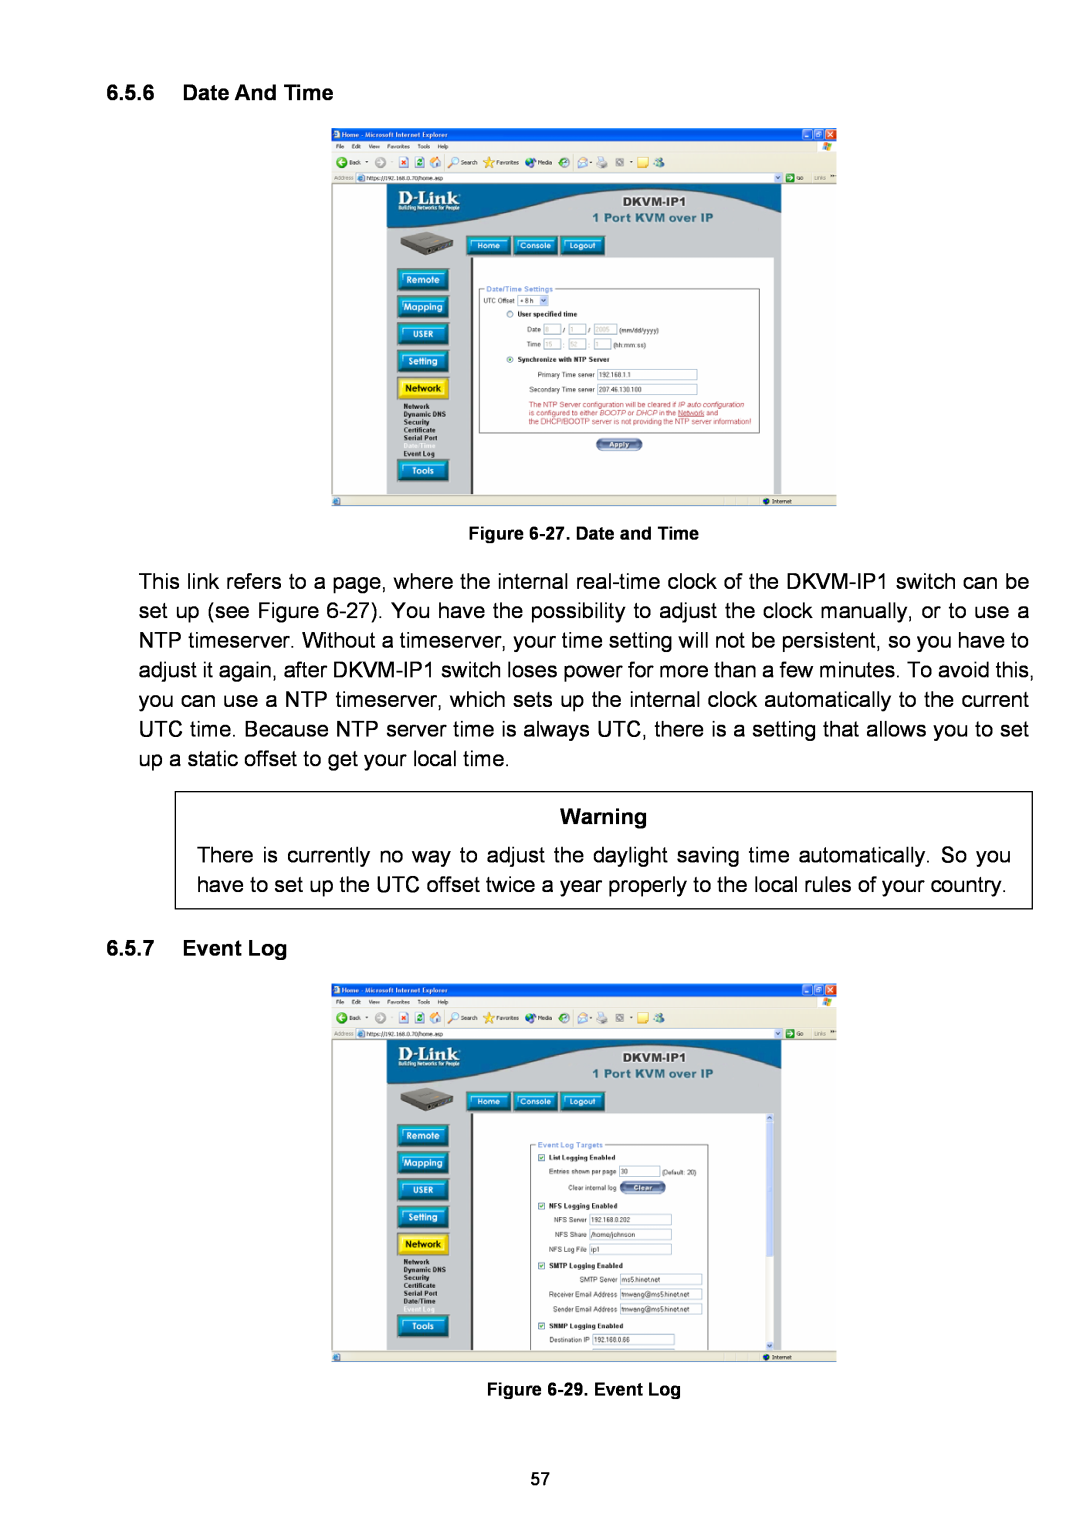 D-Link DKVM-IP1 manual Date And Time, 27. Date and Time, 29. Event Log 